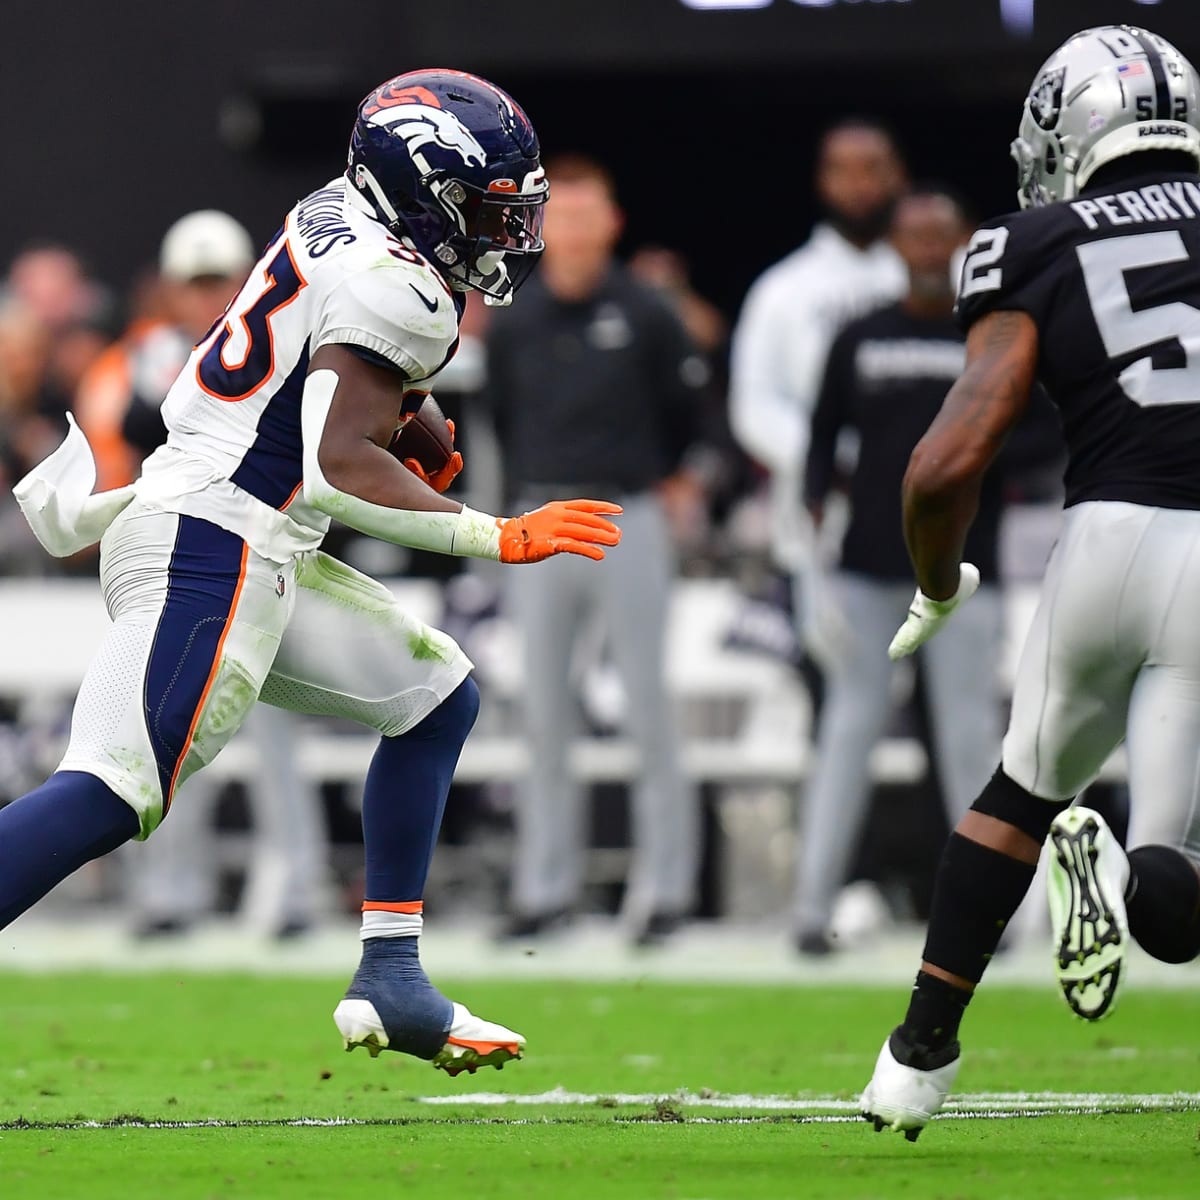 How to Stream the Broncos vs. Raiders Game Live - Week 1